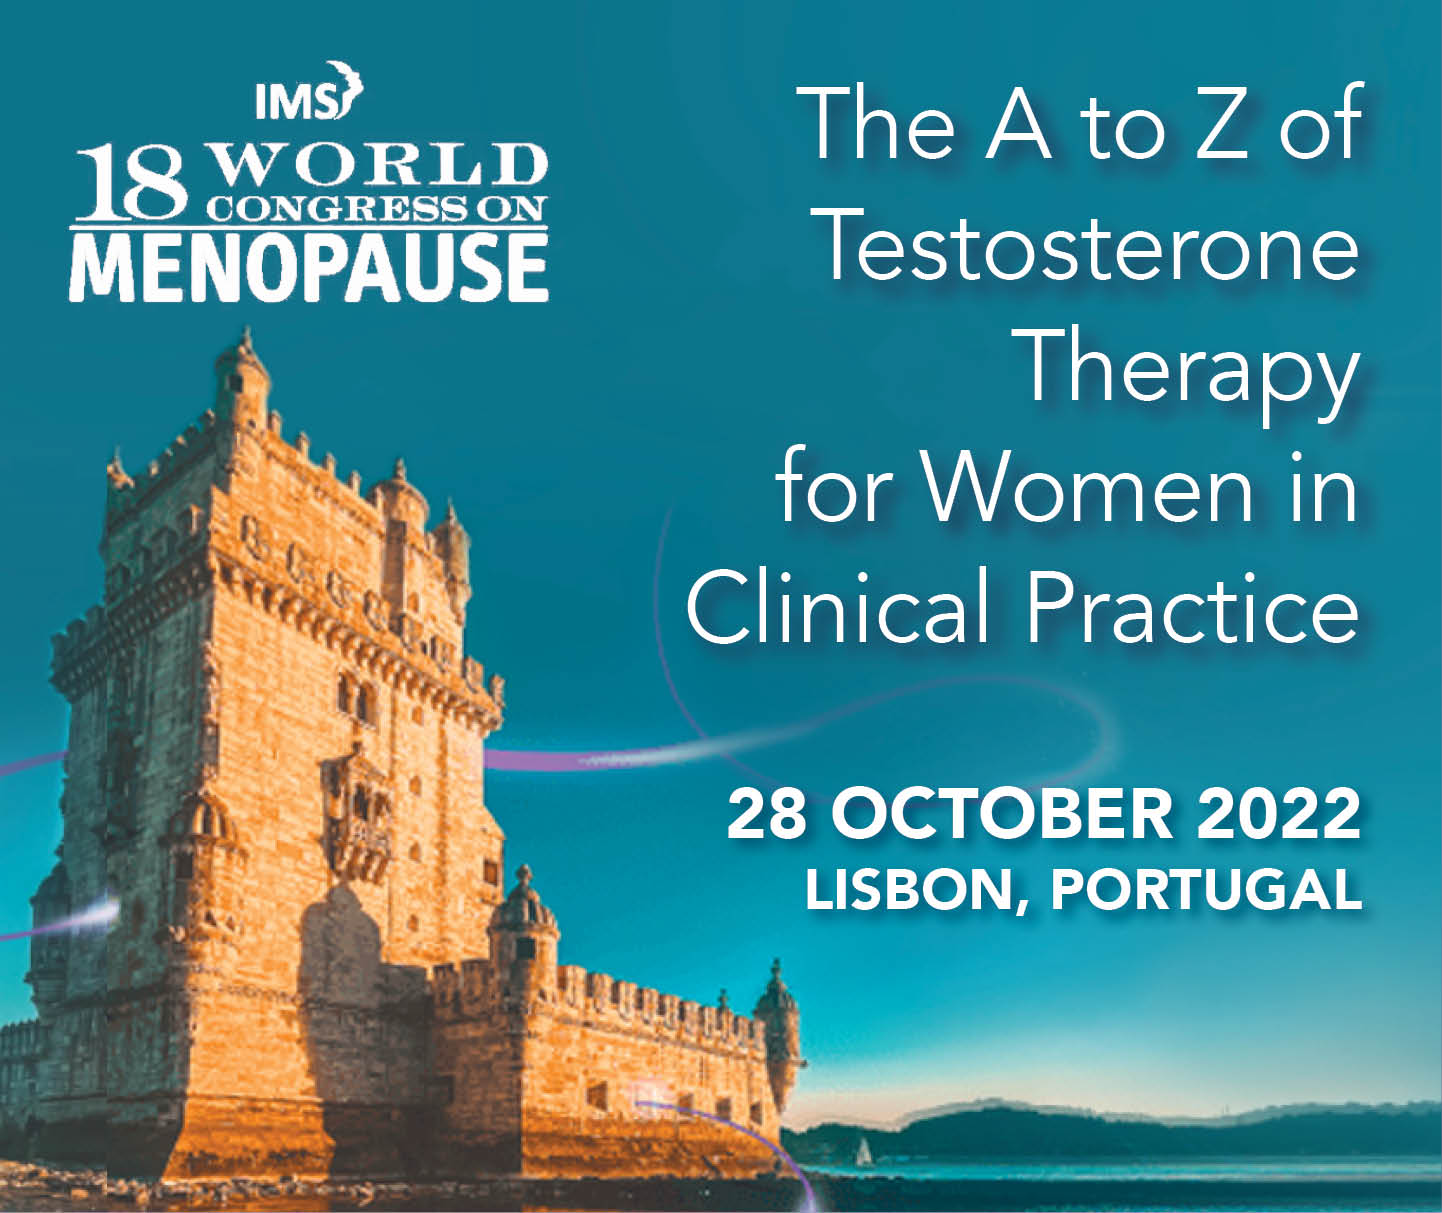 HOT OFF THE PRESS! The A-Z of Testosterone Therapy for Women thumbnail